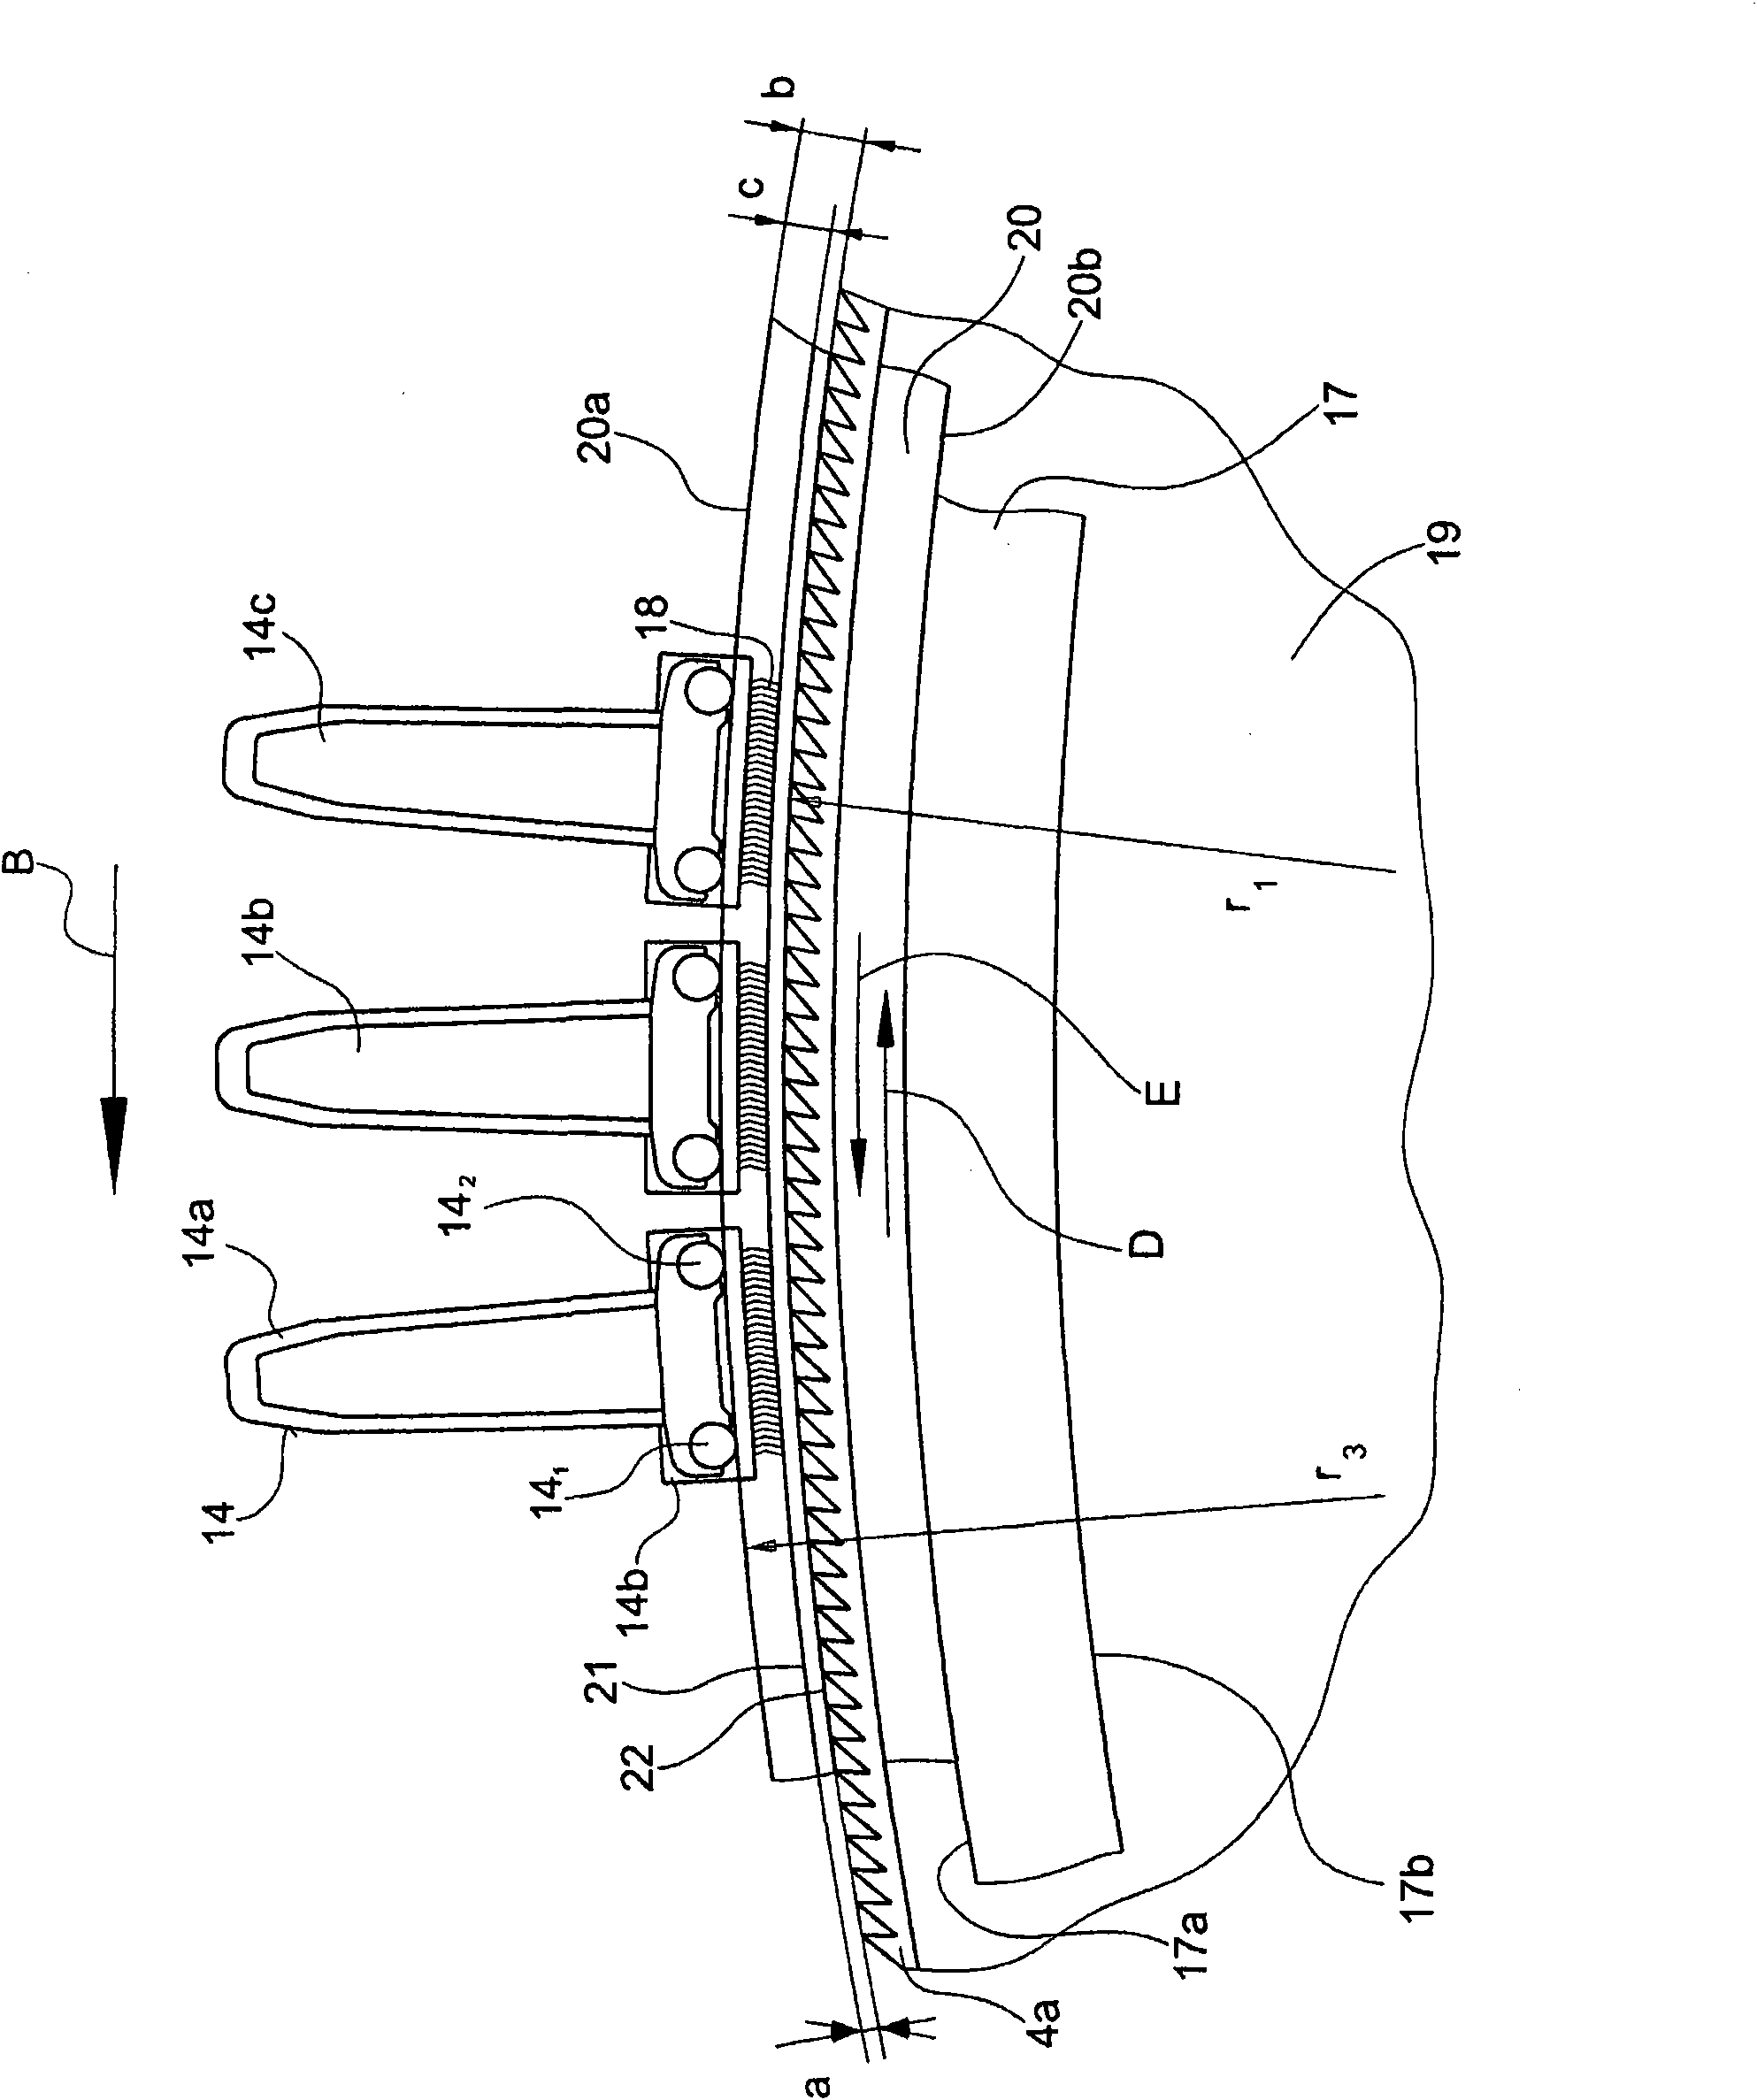 Device for setting operation clearance on spinning room preparation machine